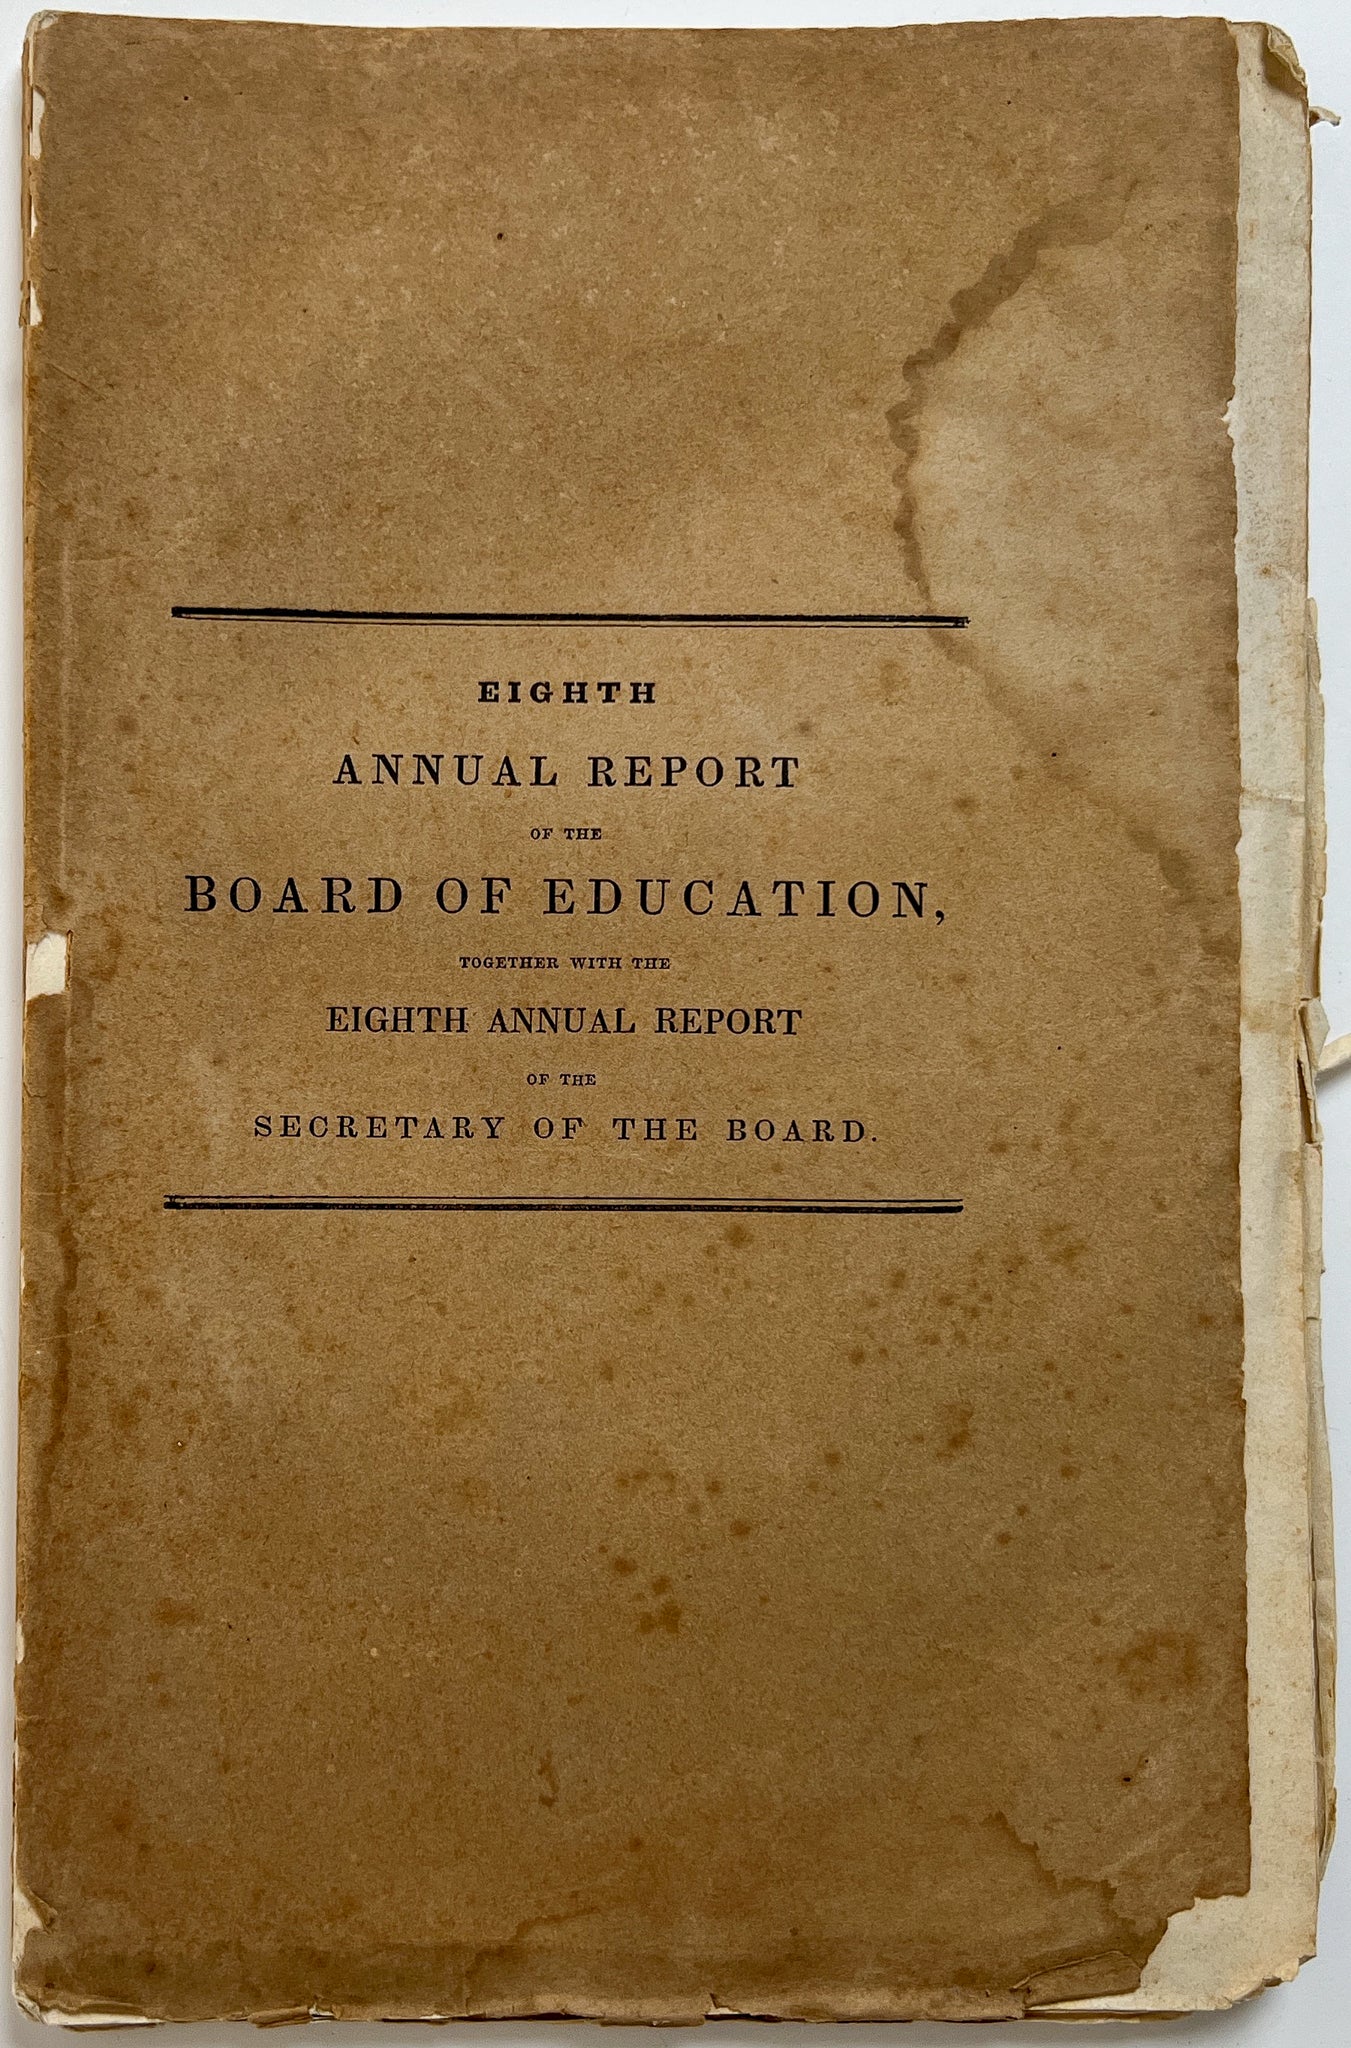 Eighth Annual Report of the Board of Education, together with the Eighth Annual Report of the Secretary of the Board (1845)